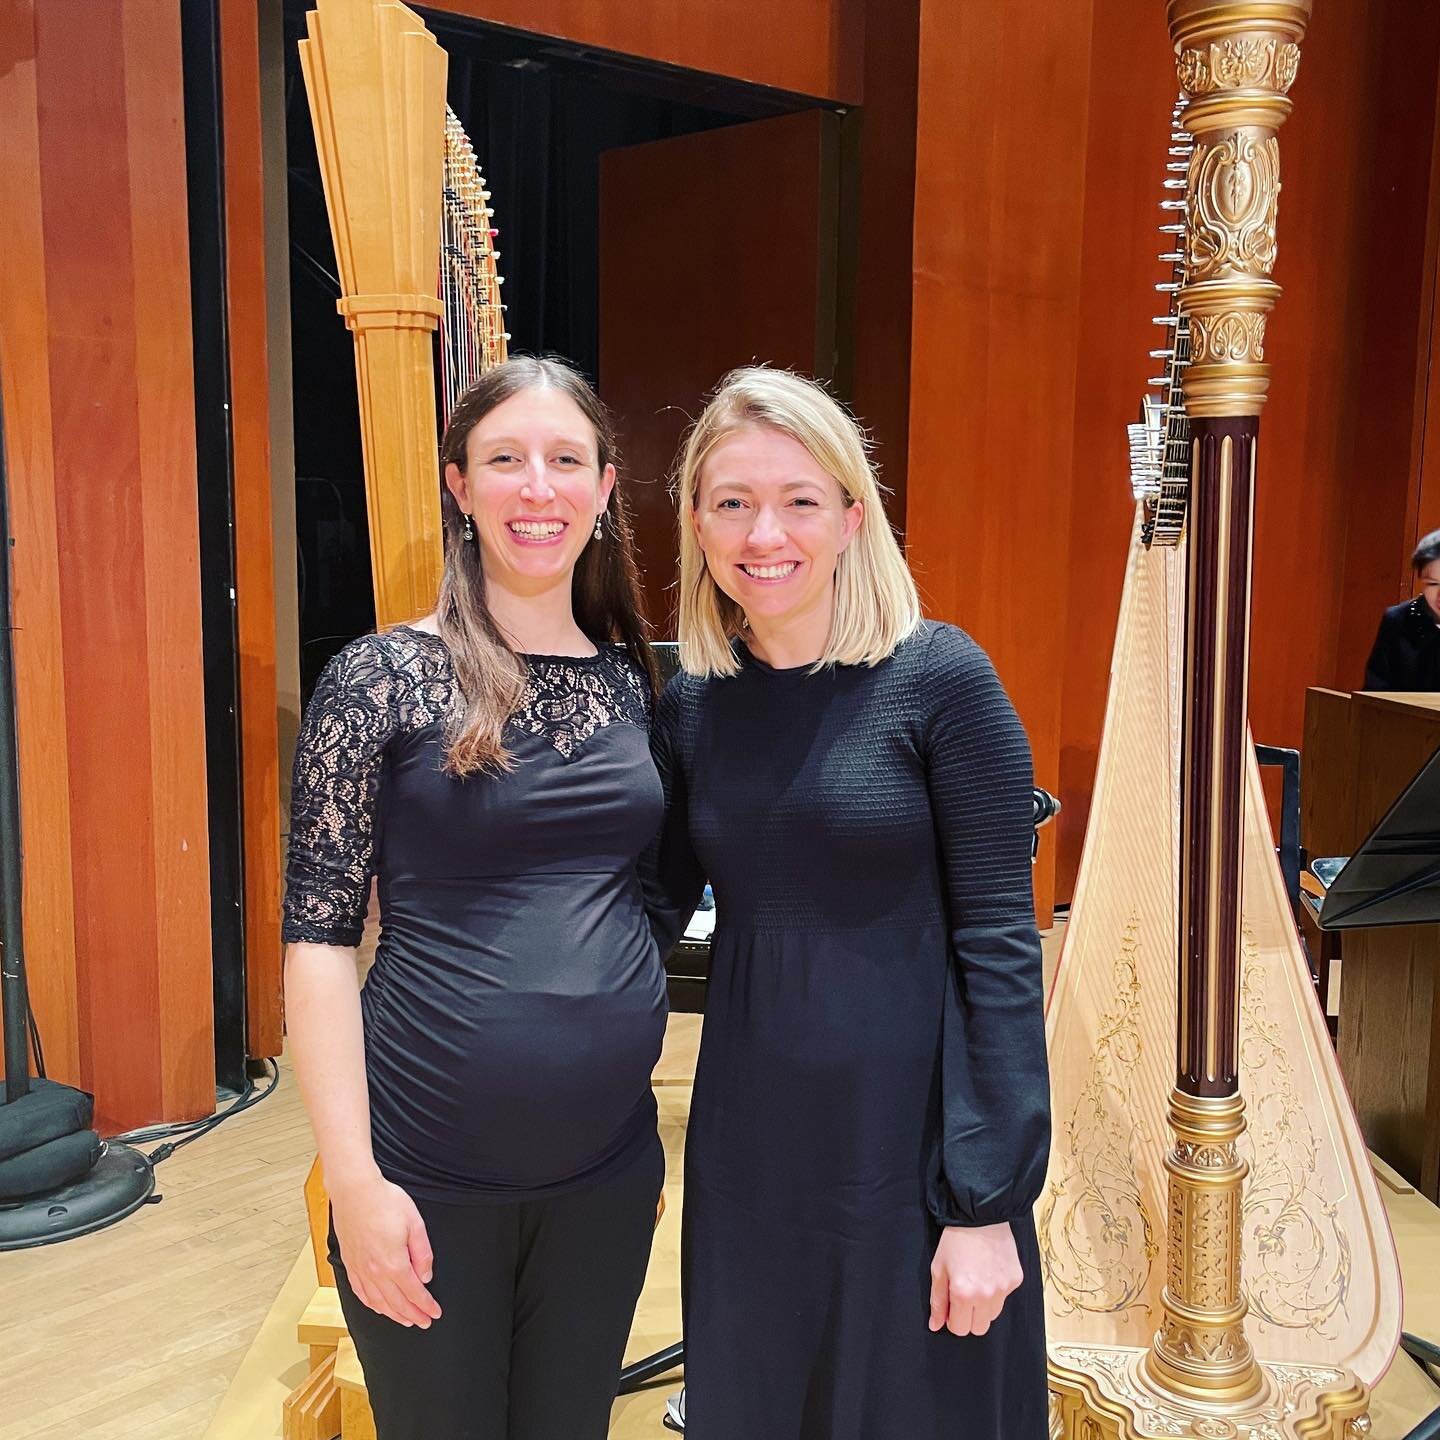 Felt so much joy and gratitude this entire week getting to play Planets with @emilykleinharp under conductor @gemmanewmusic. In 25 years of playing the harp, I can count on one hand the number of female conductors I&rsquo;ve gotten to play for. It wa